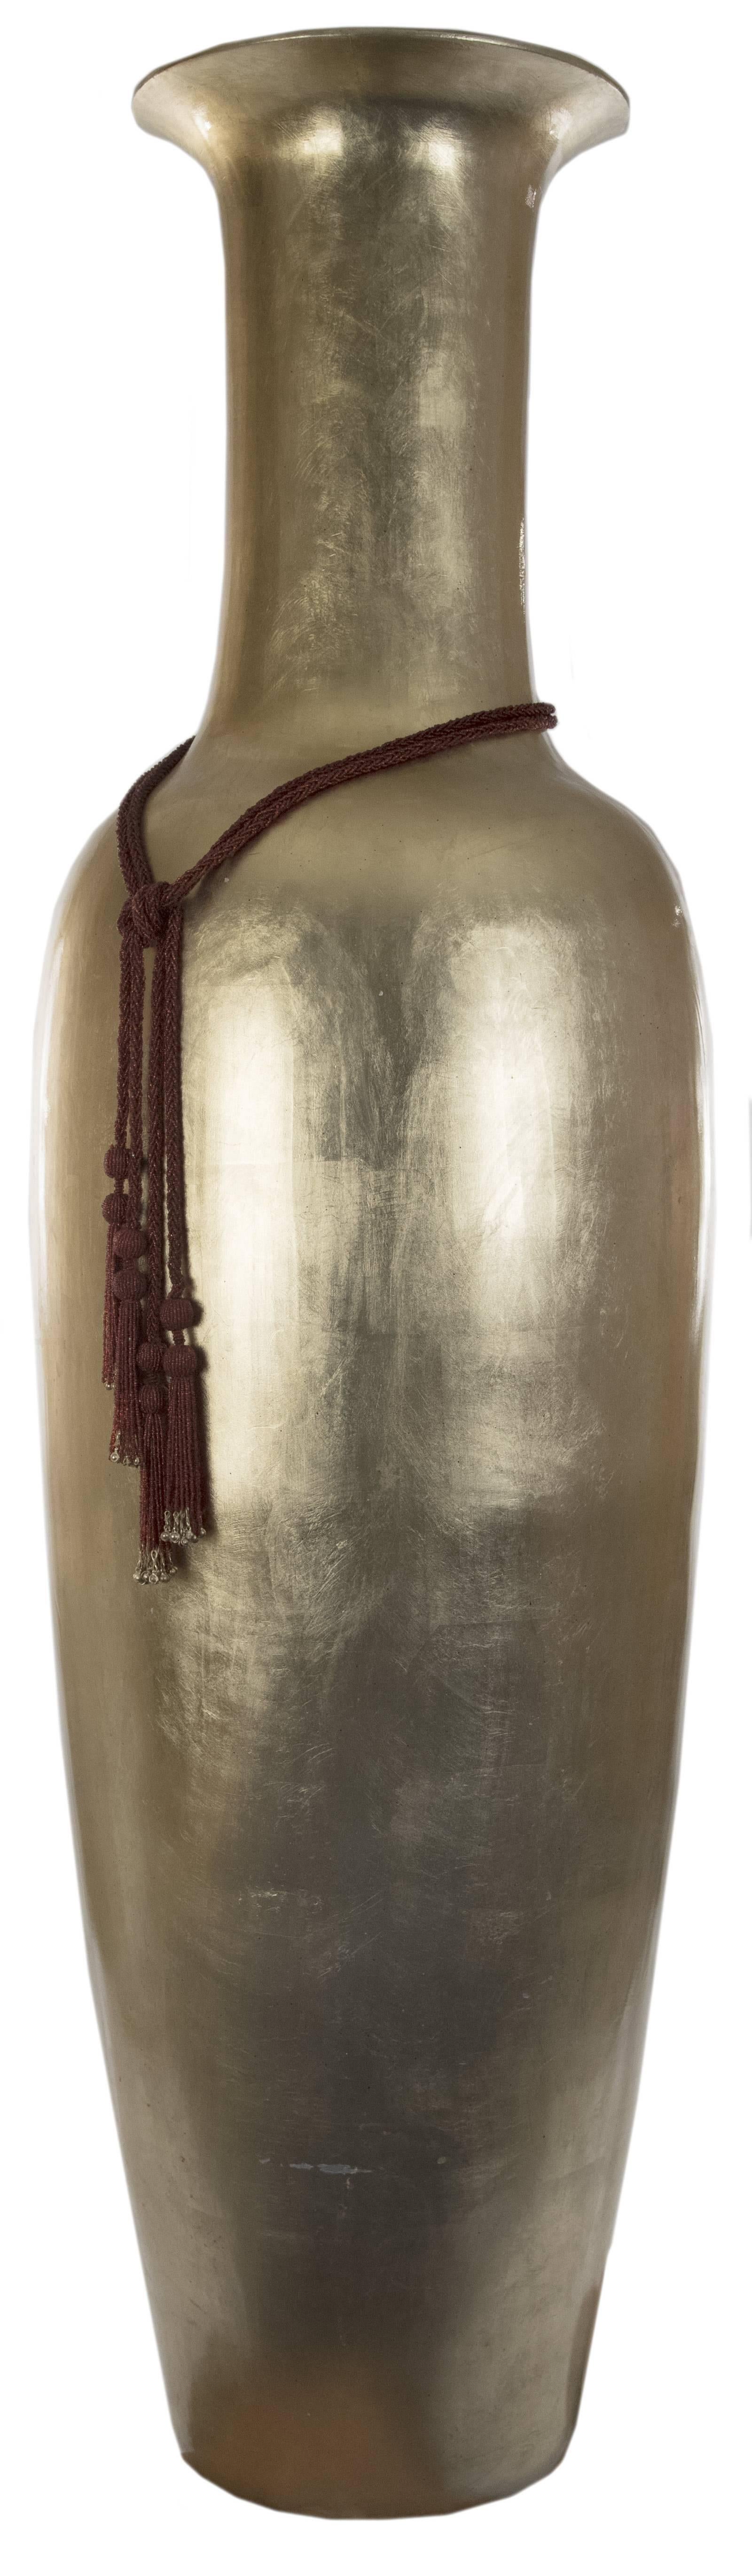 A large floor vase with a wide and flared rim above a narrow cylindrical neck leading to an elongated baluster body on a flat base, the entire surface covered with gold leaf. Measures: 71 x 21 inches.